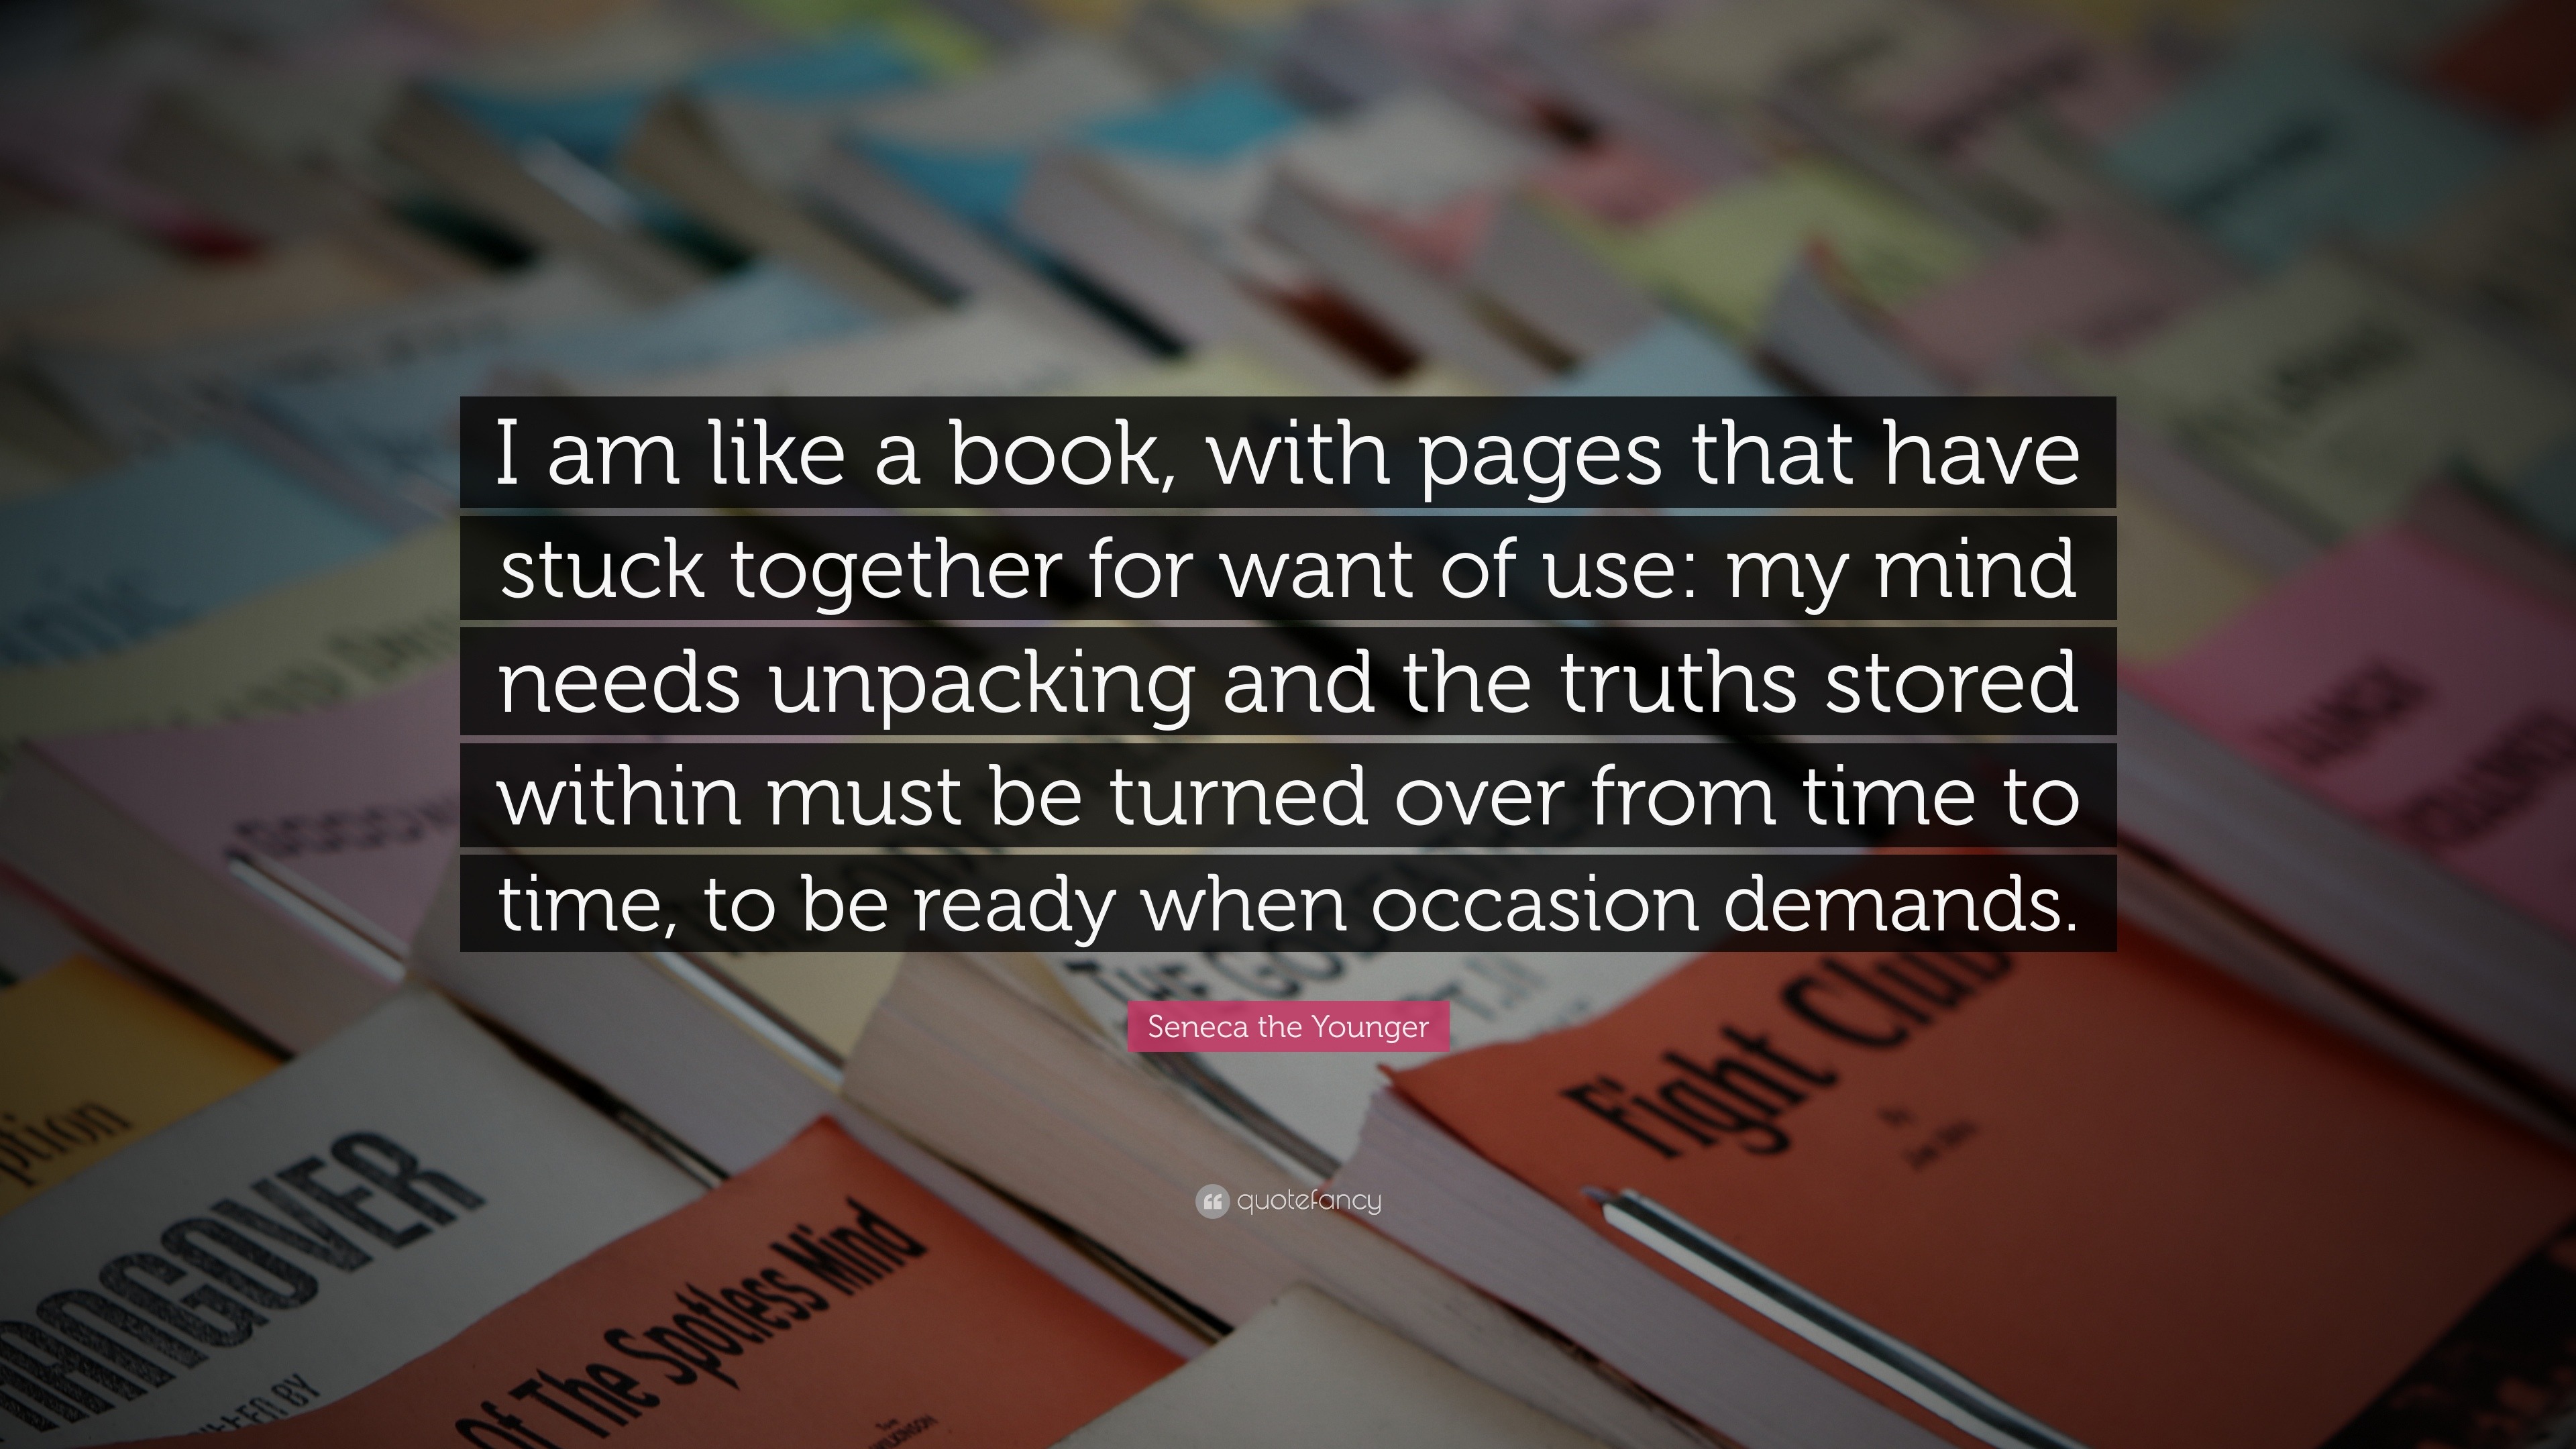 Seneca The Younger Quote: “I Am Like A Book, With Pages That Have Stuck Together For Want Of Use: My Mind Needs Unpacking And The Truths Stored Wit...”